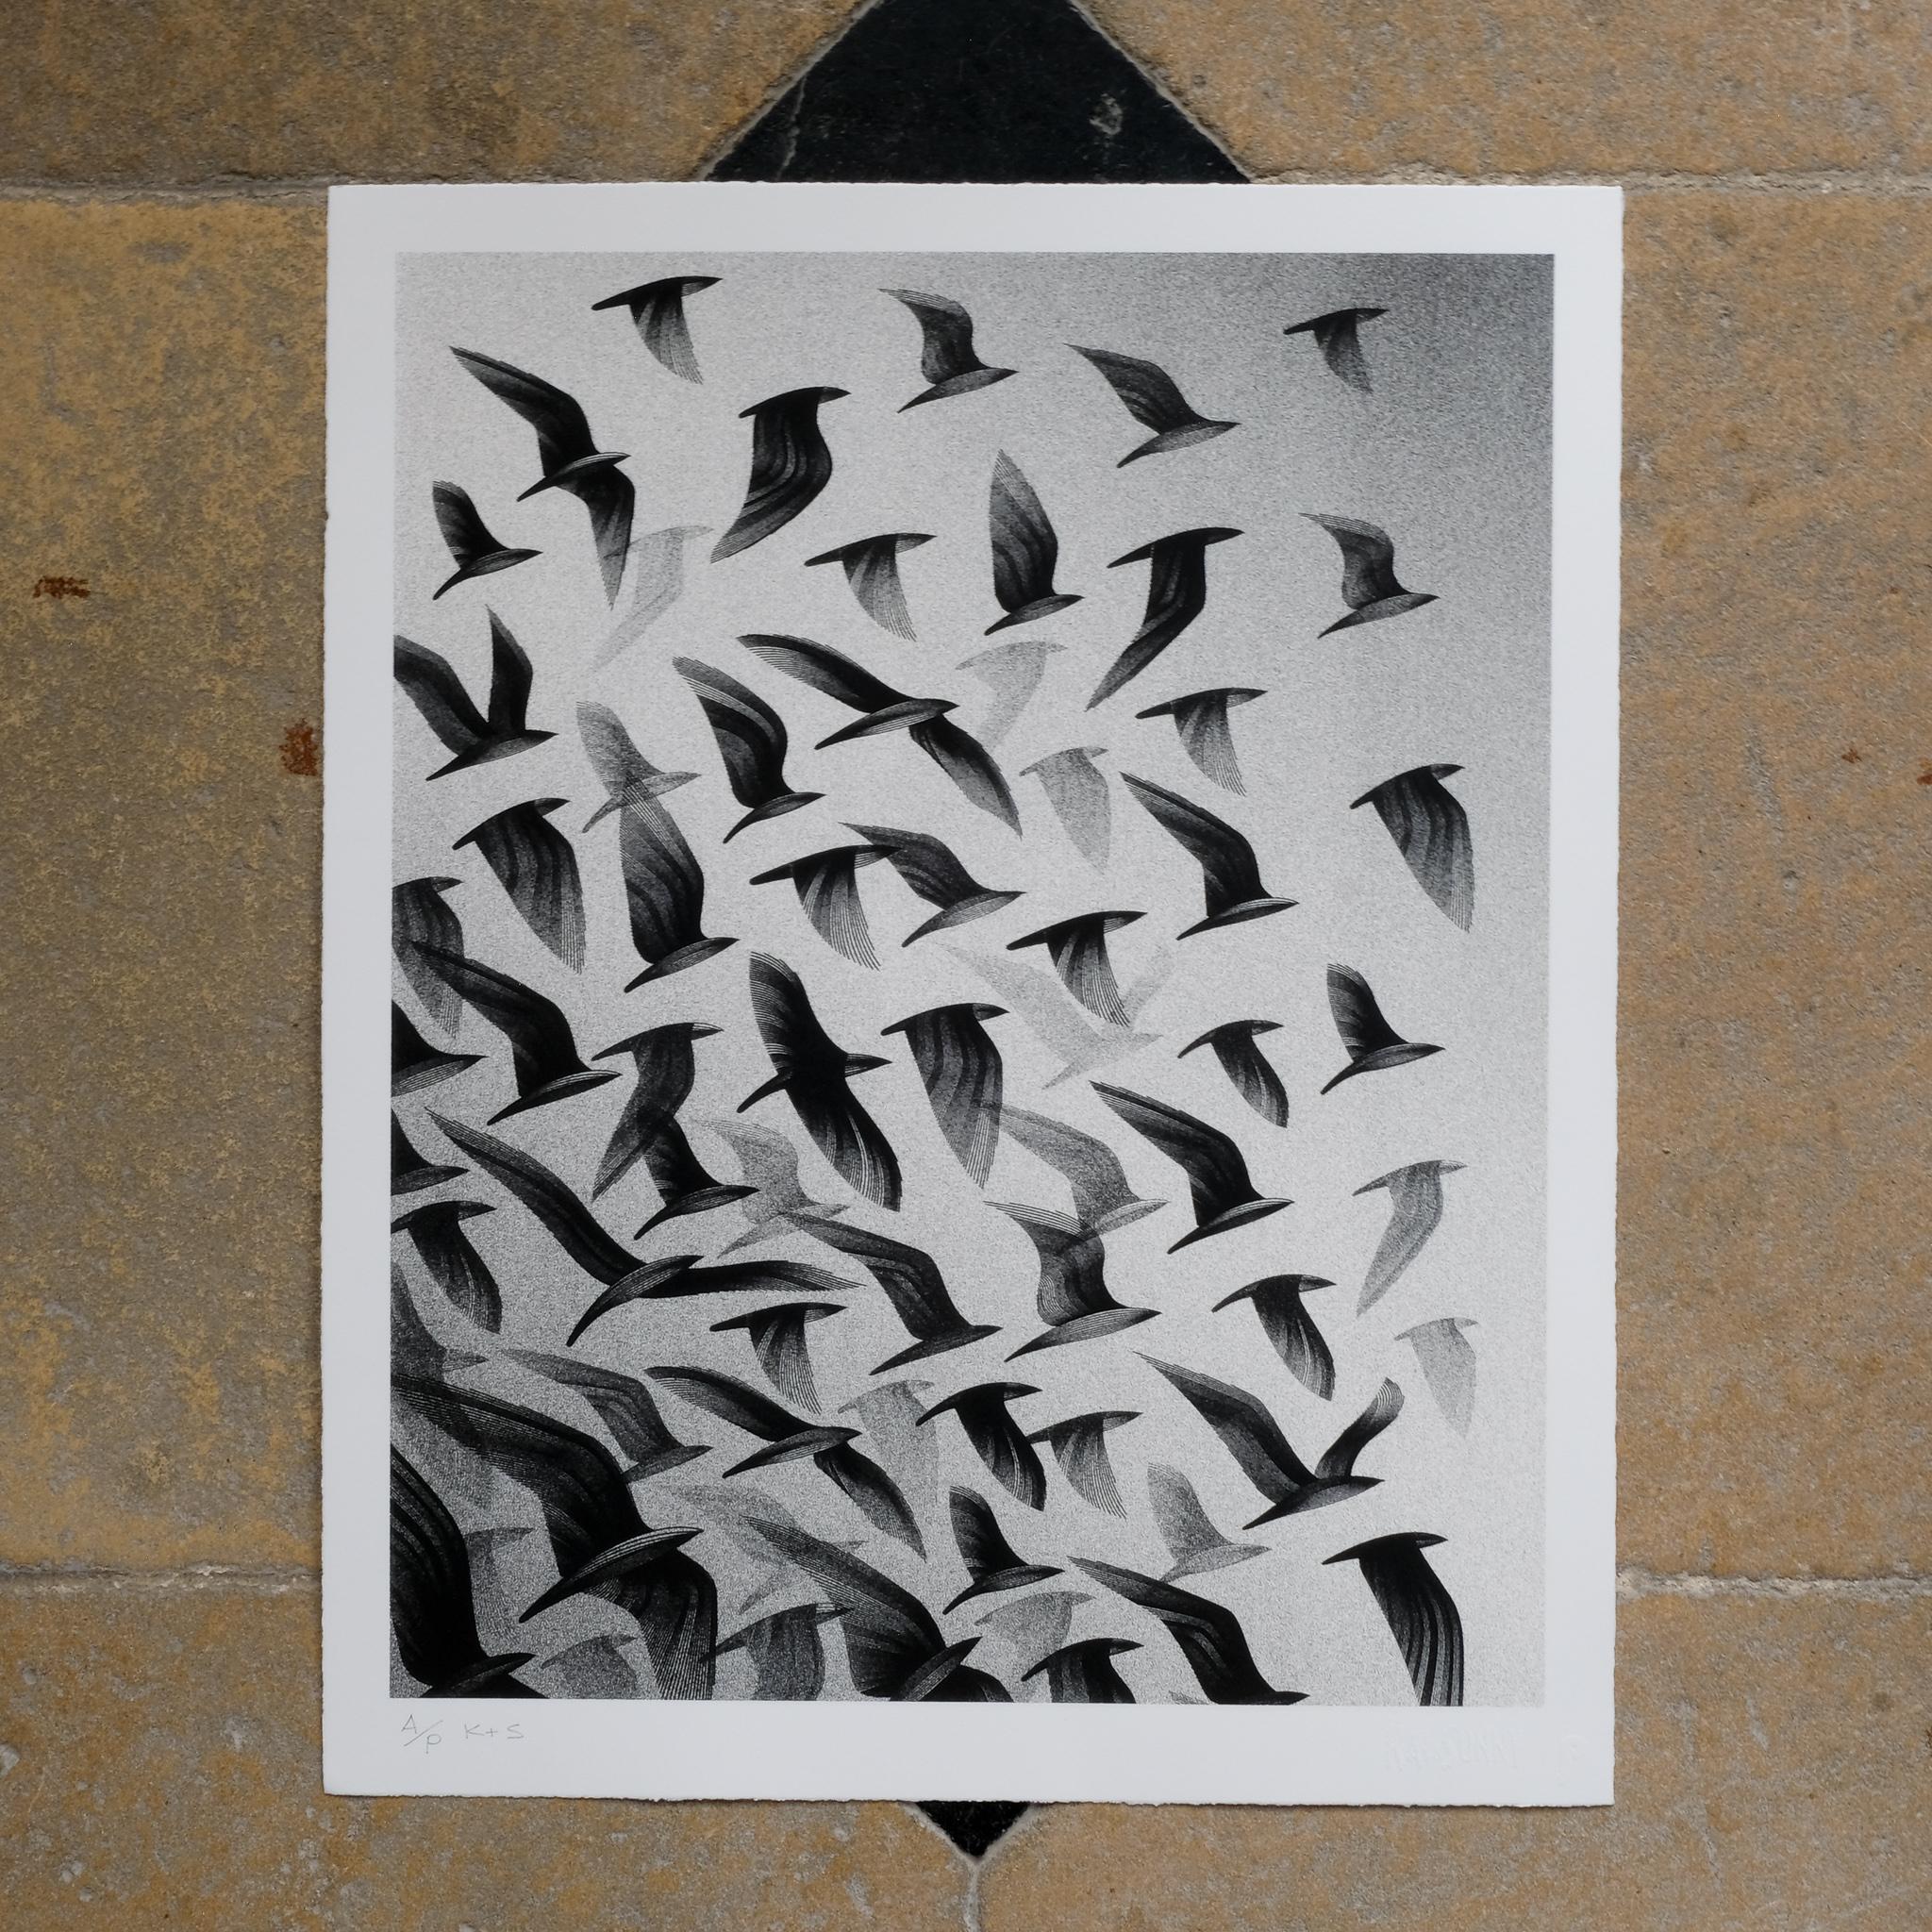 Screenprint in black and white, 2011, on Somerset 300gsm paper, initialled in pencil, inscribed ‘A/P’ (an artist’s proof aside from the edition of 125), with the artist’s blindstamp, from the portfolio Ghosts of Gone Birds, printed and published by